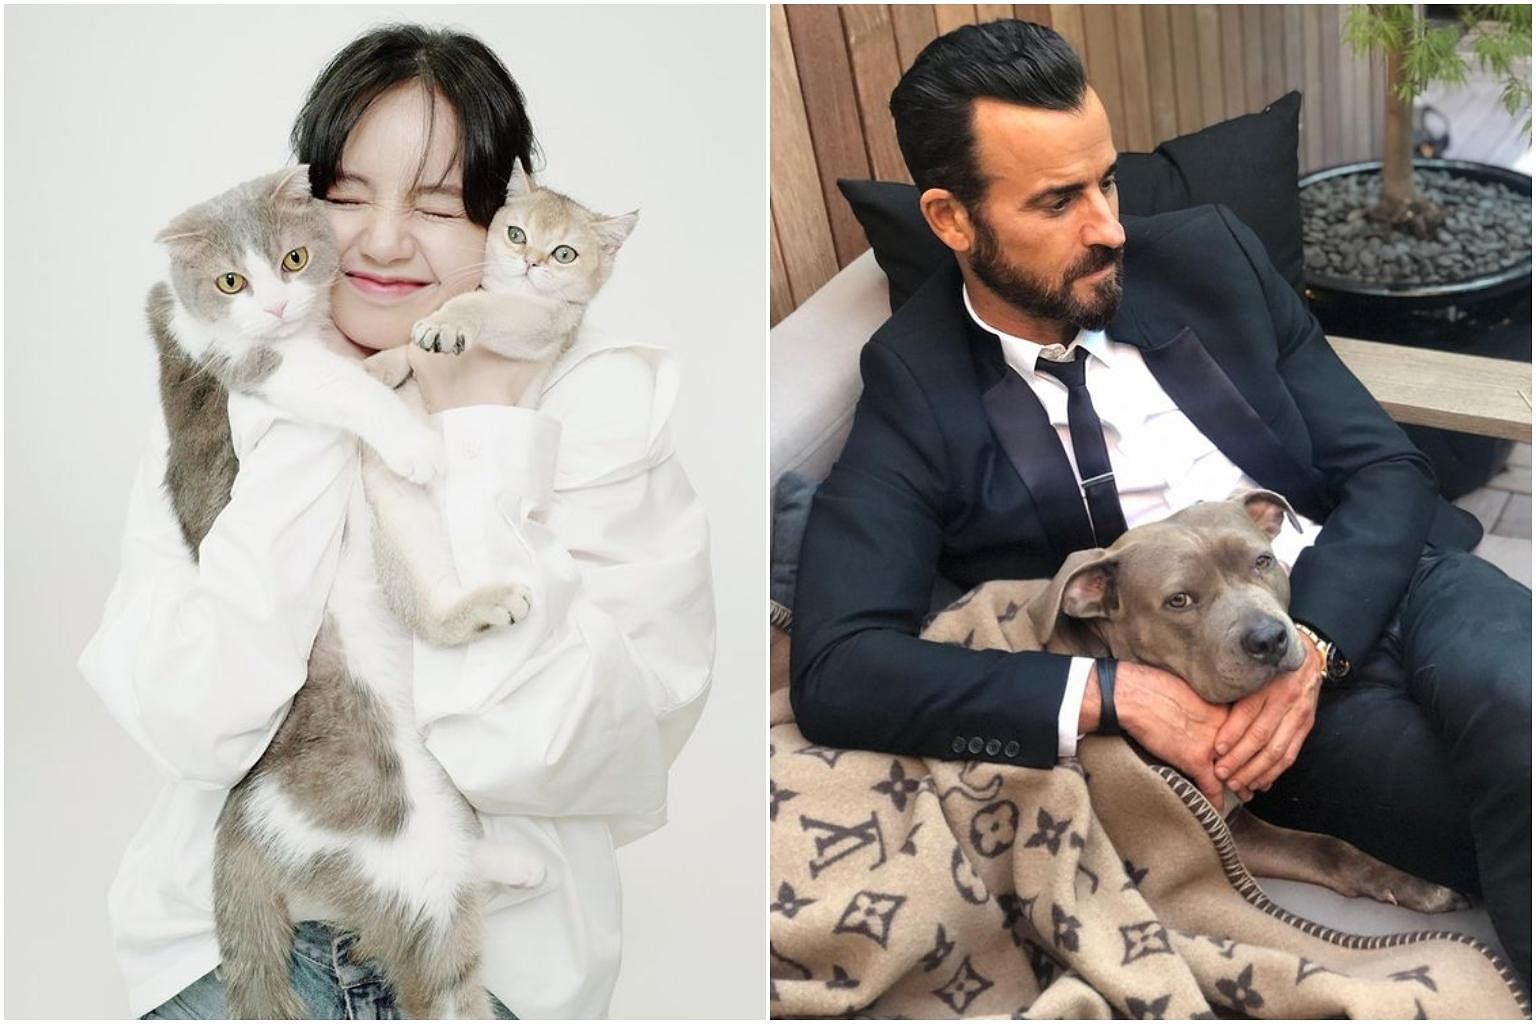 Blackpink S Lisa Actor Justin Theroux Start Instagram Accounts For Their Pets Entertainment News Top Stories The Straits Times